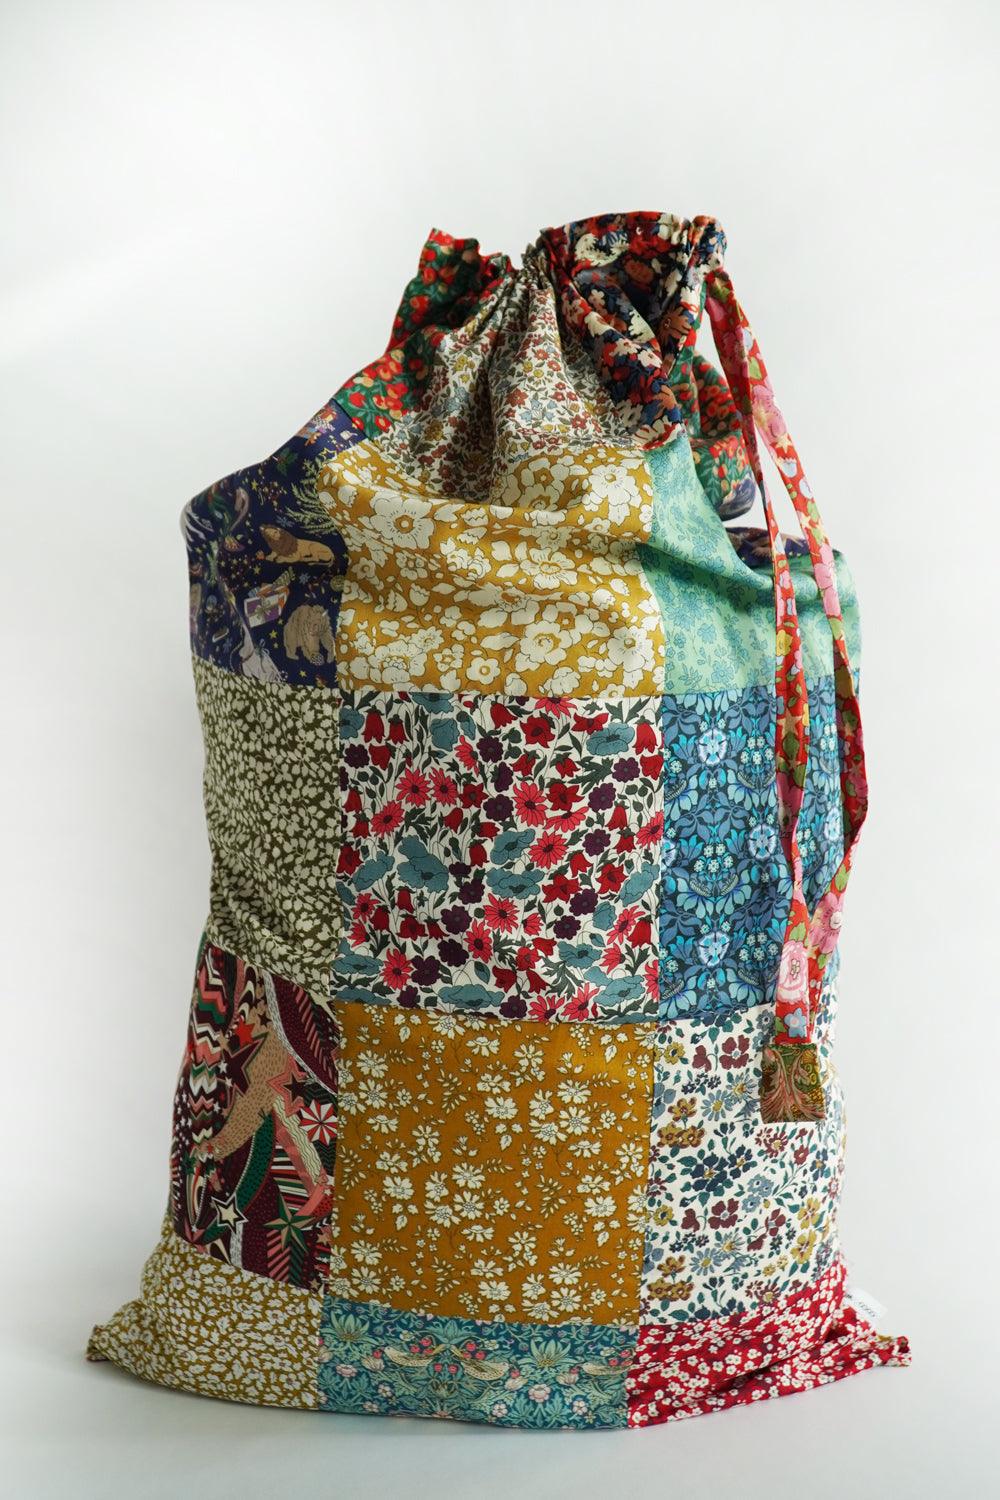 Patchwork Storage Sack made with Liberty Fabric - Coco & Wolf